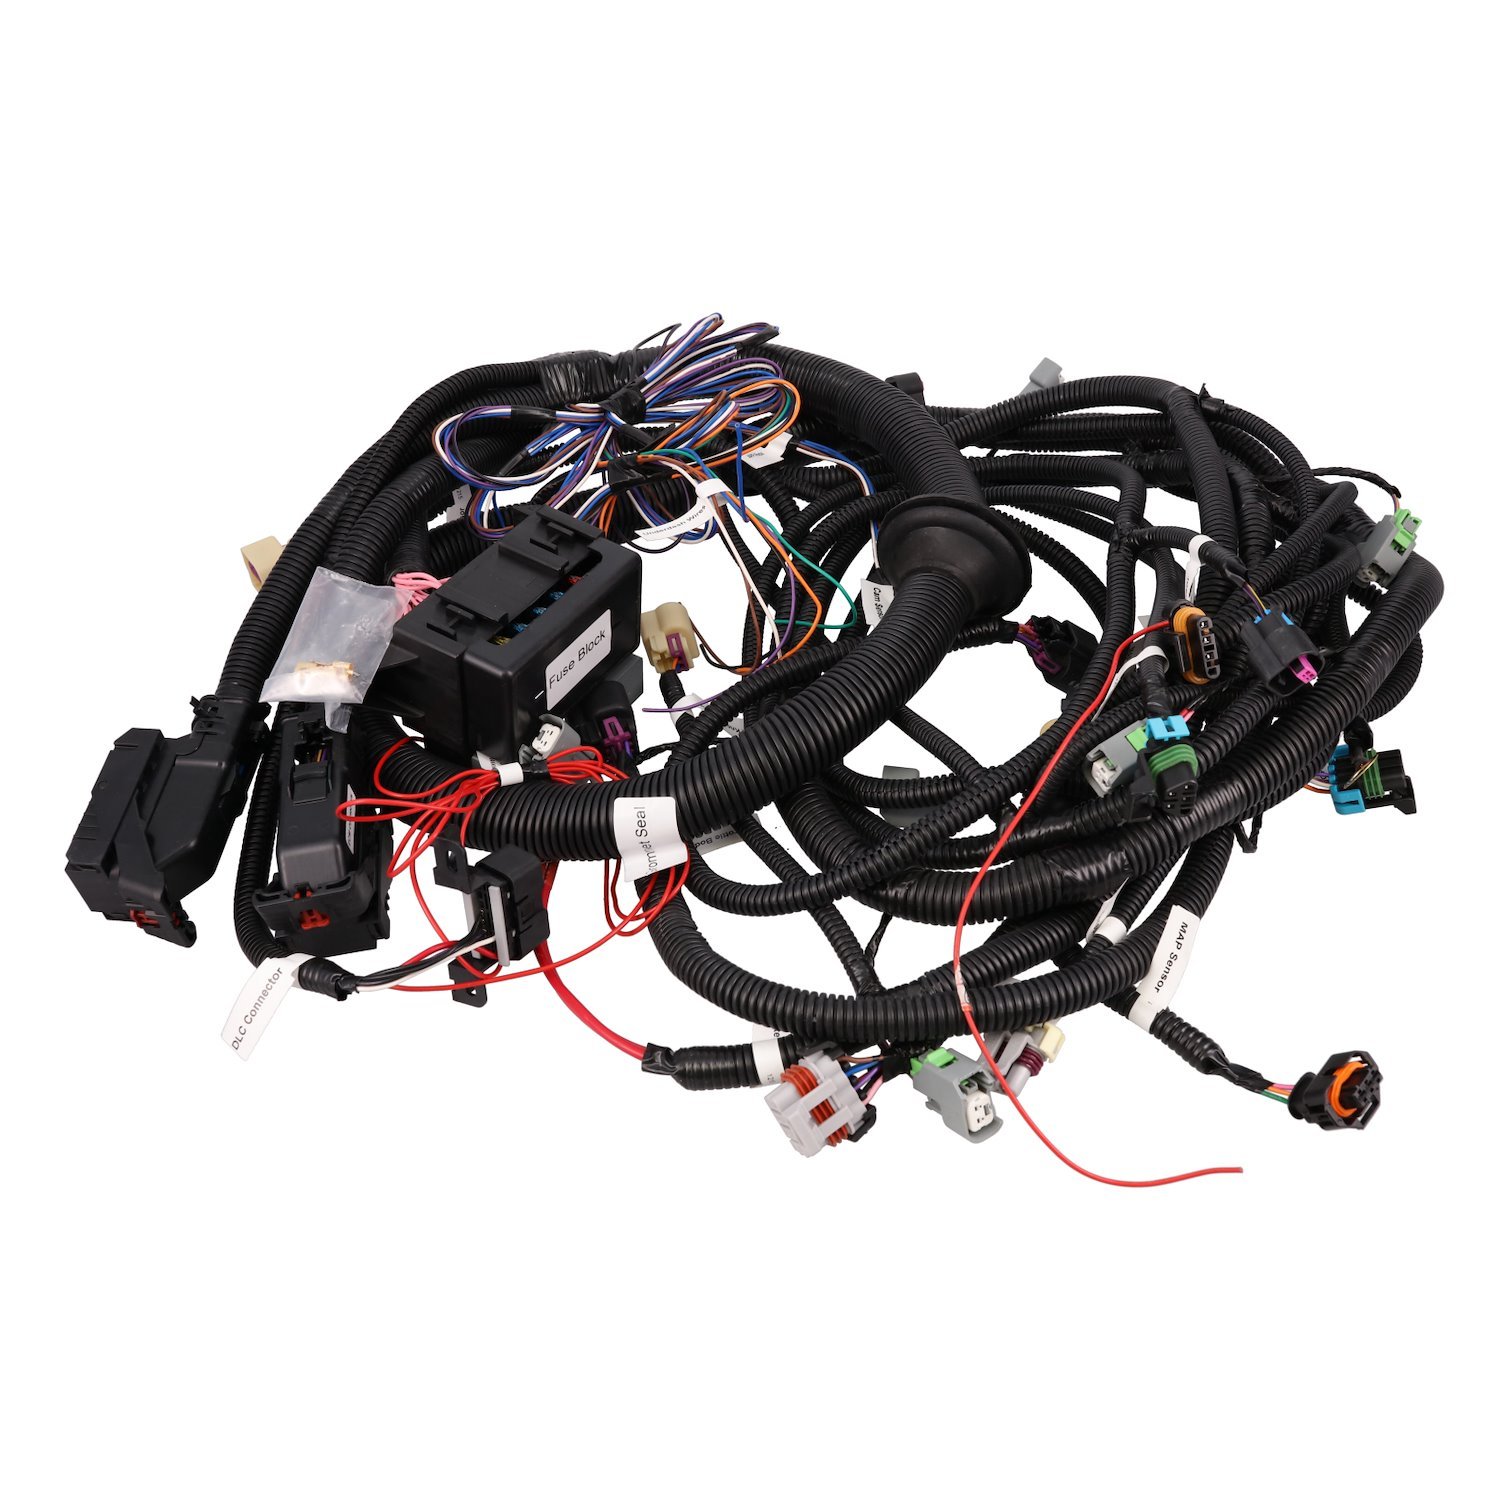 WH1215 Standalone Wiring Harness, LH6, LY5, LMG, LH8 Drive by Wire w/ manual trans